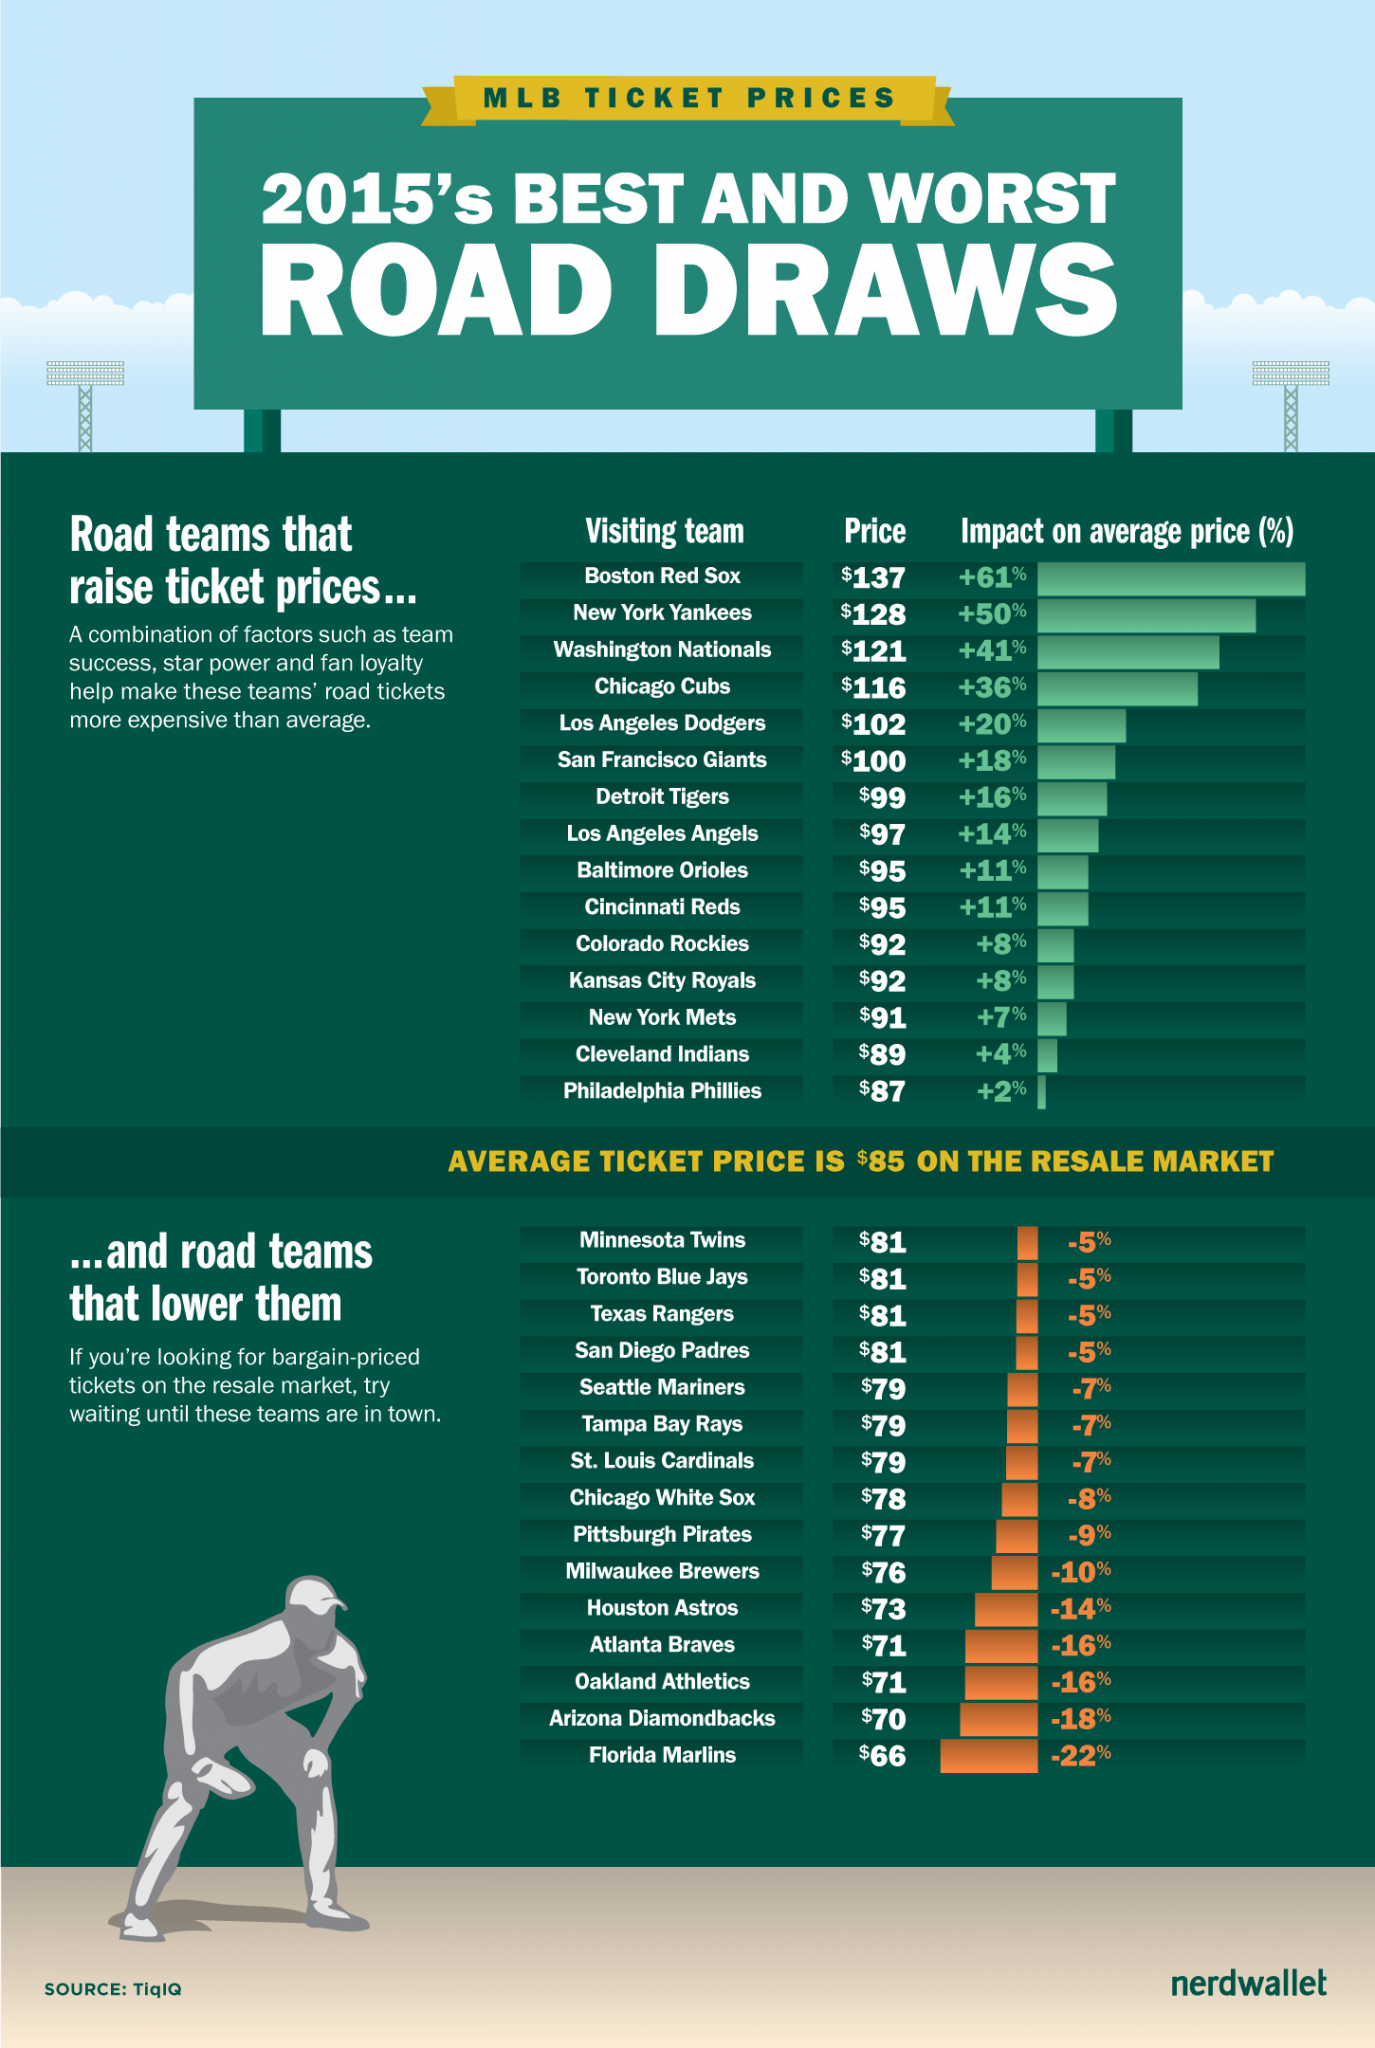 MLB Ticket Prices: Best and Worst Road Draws of 2015